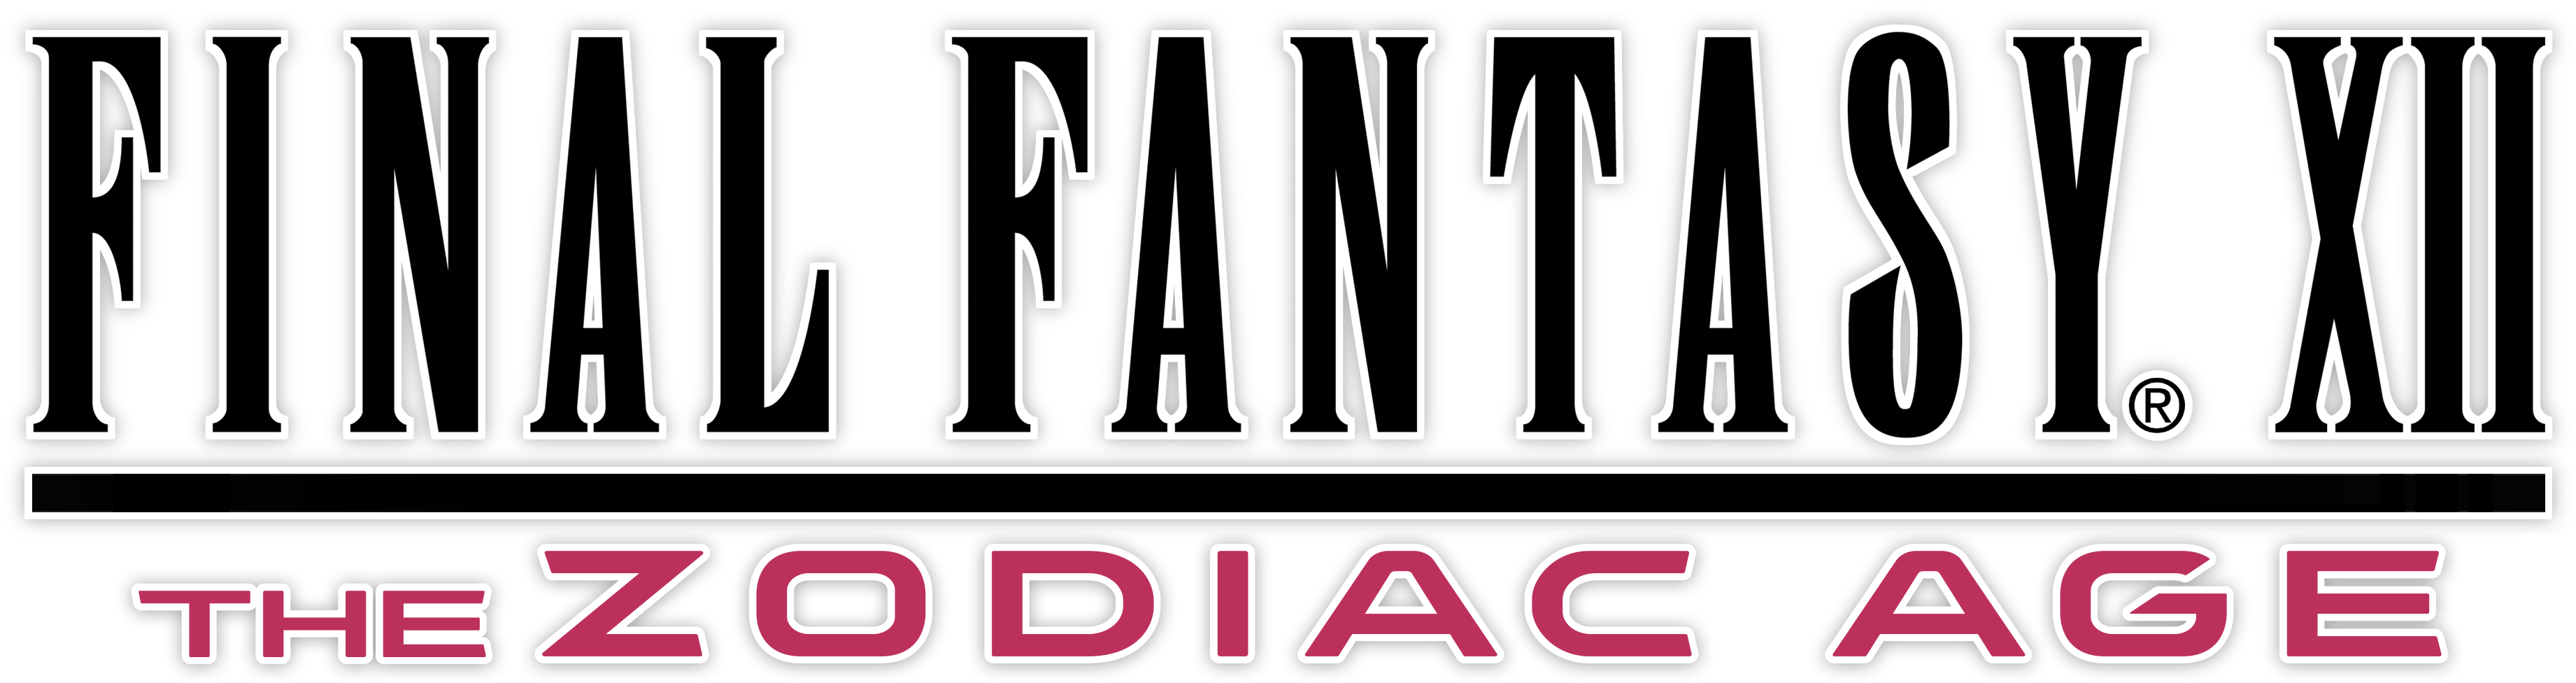 Final Fantasy Xii The Zodiac Age Coming To Playstation - Final Fantasy 12 Zodiac Age Logo Clipart (1280x590), Png Download